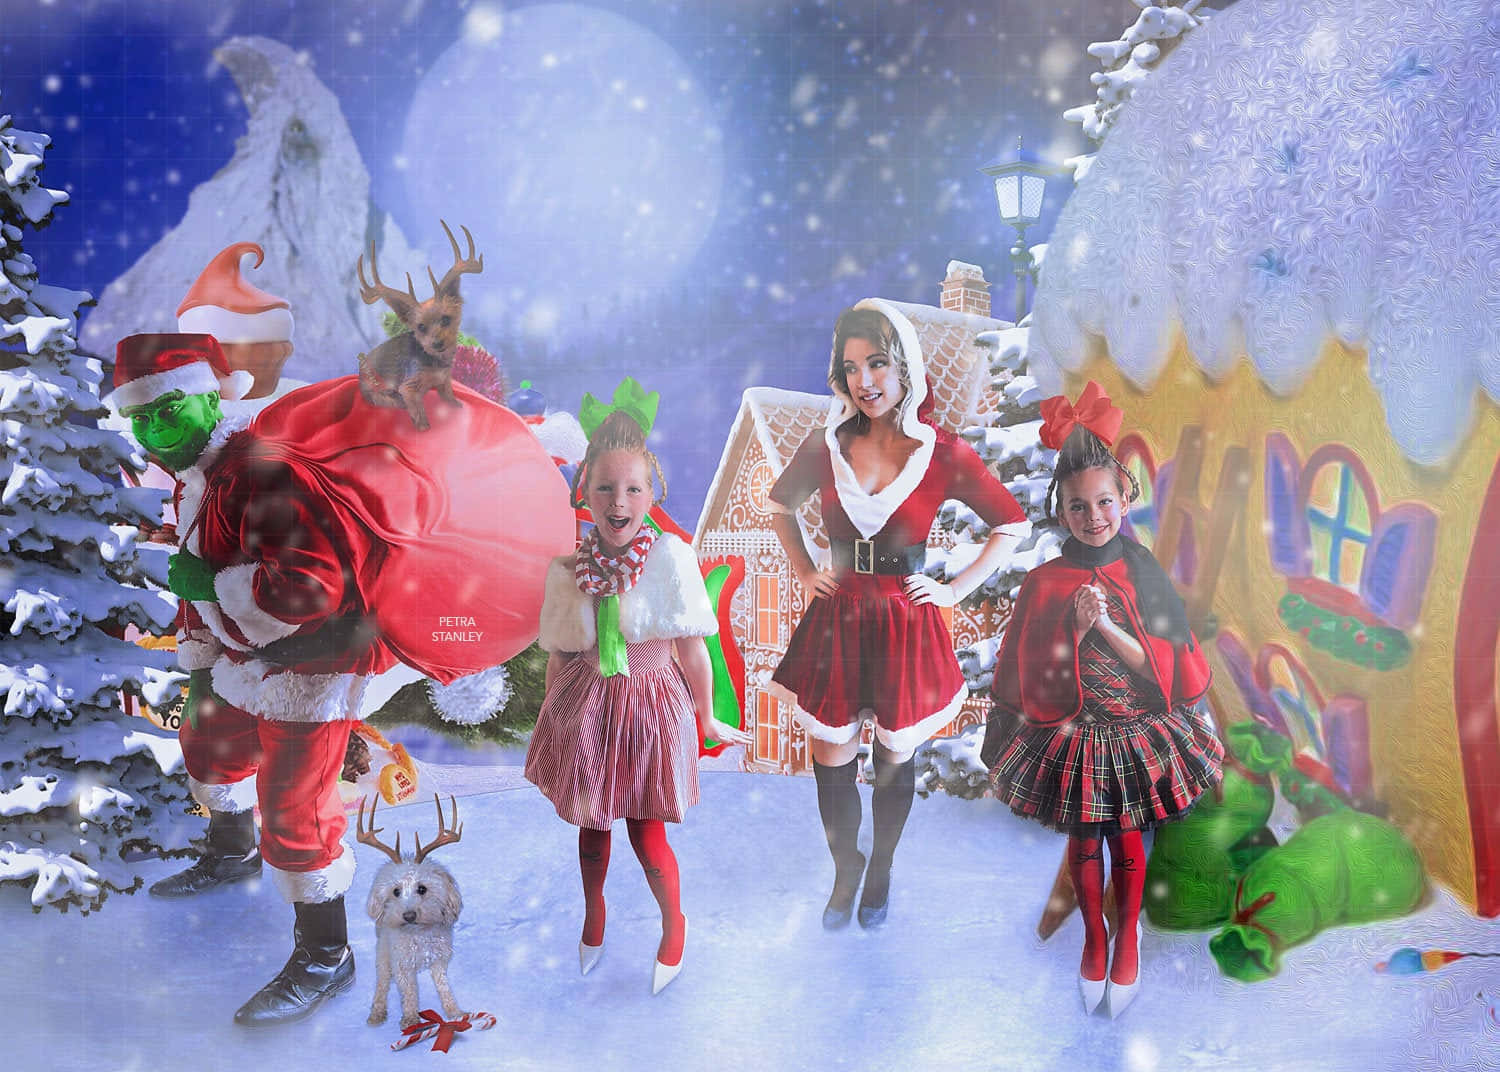 A Group Of Children And Santa Claus In A Snowy Scene Wallpaper